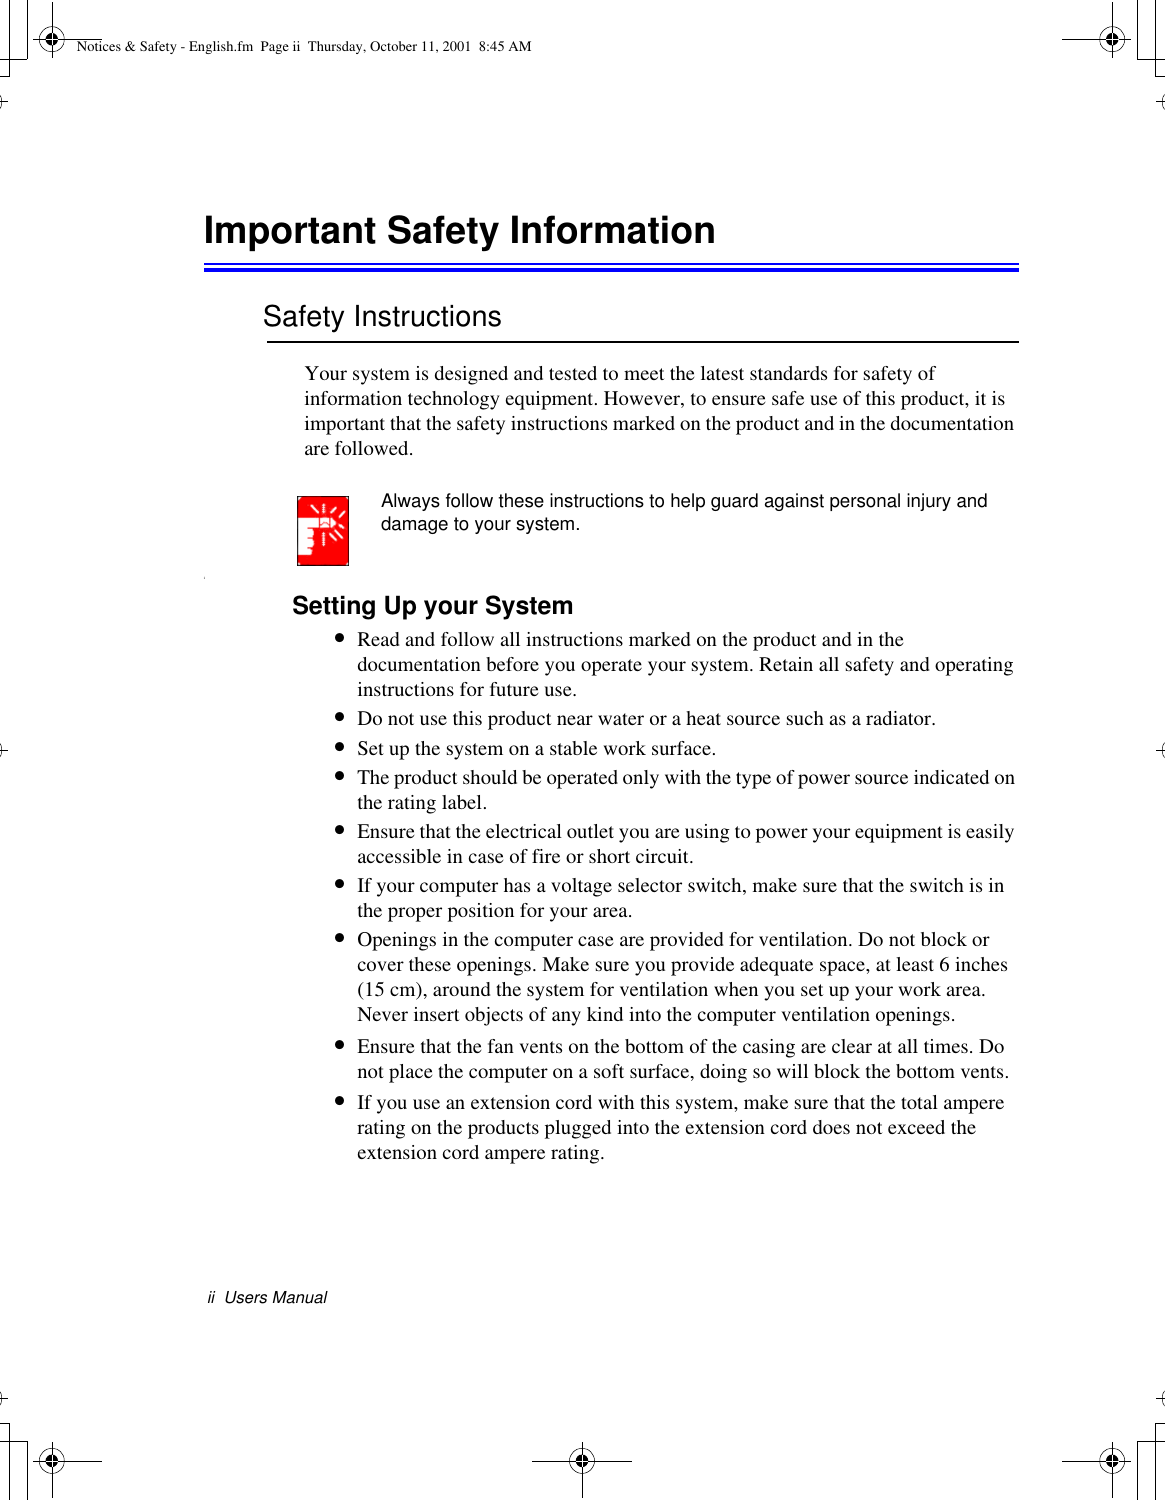 ii  Users ManualImportant Safety InformationSafety InstructionsYour system is designed and tested to meet the latest standards for safety of information technology equipment. However, to ensure safe use of this product, it is important that the safety instructions marked on the product and in the documentation are followed.Always follow these instructions to help guard against personal injury and damage to your system.iSetting Up your System•Read and follow all instructions marked on the product and in the documentation before you operate your system. Retain all safety and operating instructions for future use.•Do not use this product near water or a heat source such as a radiator.•Set up the system on a stable work surface.•The product should be operated only with the type of power source indicated on the rating label.•Ensure that the electrical outlet you are using to power your equipment is easily accessible in case of fire or short circuit.•If your computer has a voltage selector switch, make sure that the switch is in the proper position for your area.•Openings in the computer case are provided for ventilation. Do not block or cover these openings. Make sure you provide adequate space, at least 6 inches (15 cm), around the system for ventilation when you set up your work area. Never insert objects of any kind into the computer ventilation openings.•Ensure that the fan vents on the bottom of the casing are clear at all times. Do not place the computer on a soft surface, doing so will block the bottom vents.•If you use an extension cord with this system, make sure that the total ampere rating on the products plugged into the extension cord does not exceed the extension cord ampere rating.Notices &amp; Safety - English.fm  Page ii  Thursday, October 11, 2001  8:45 AM